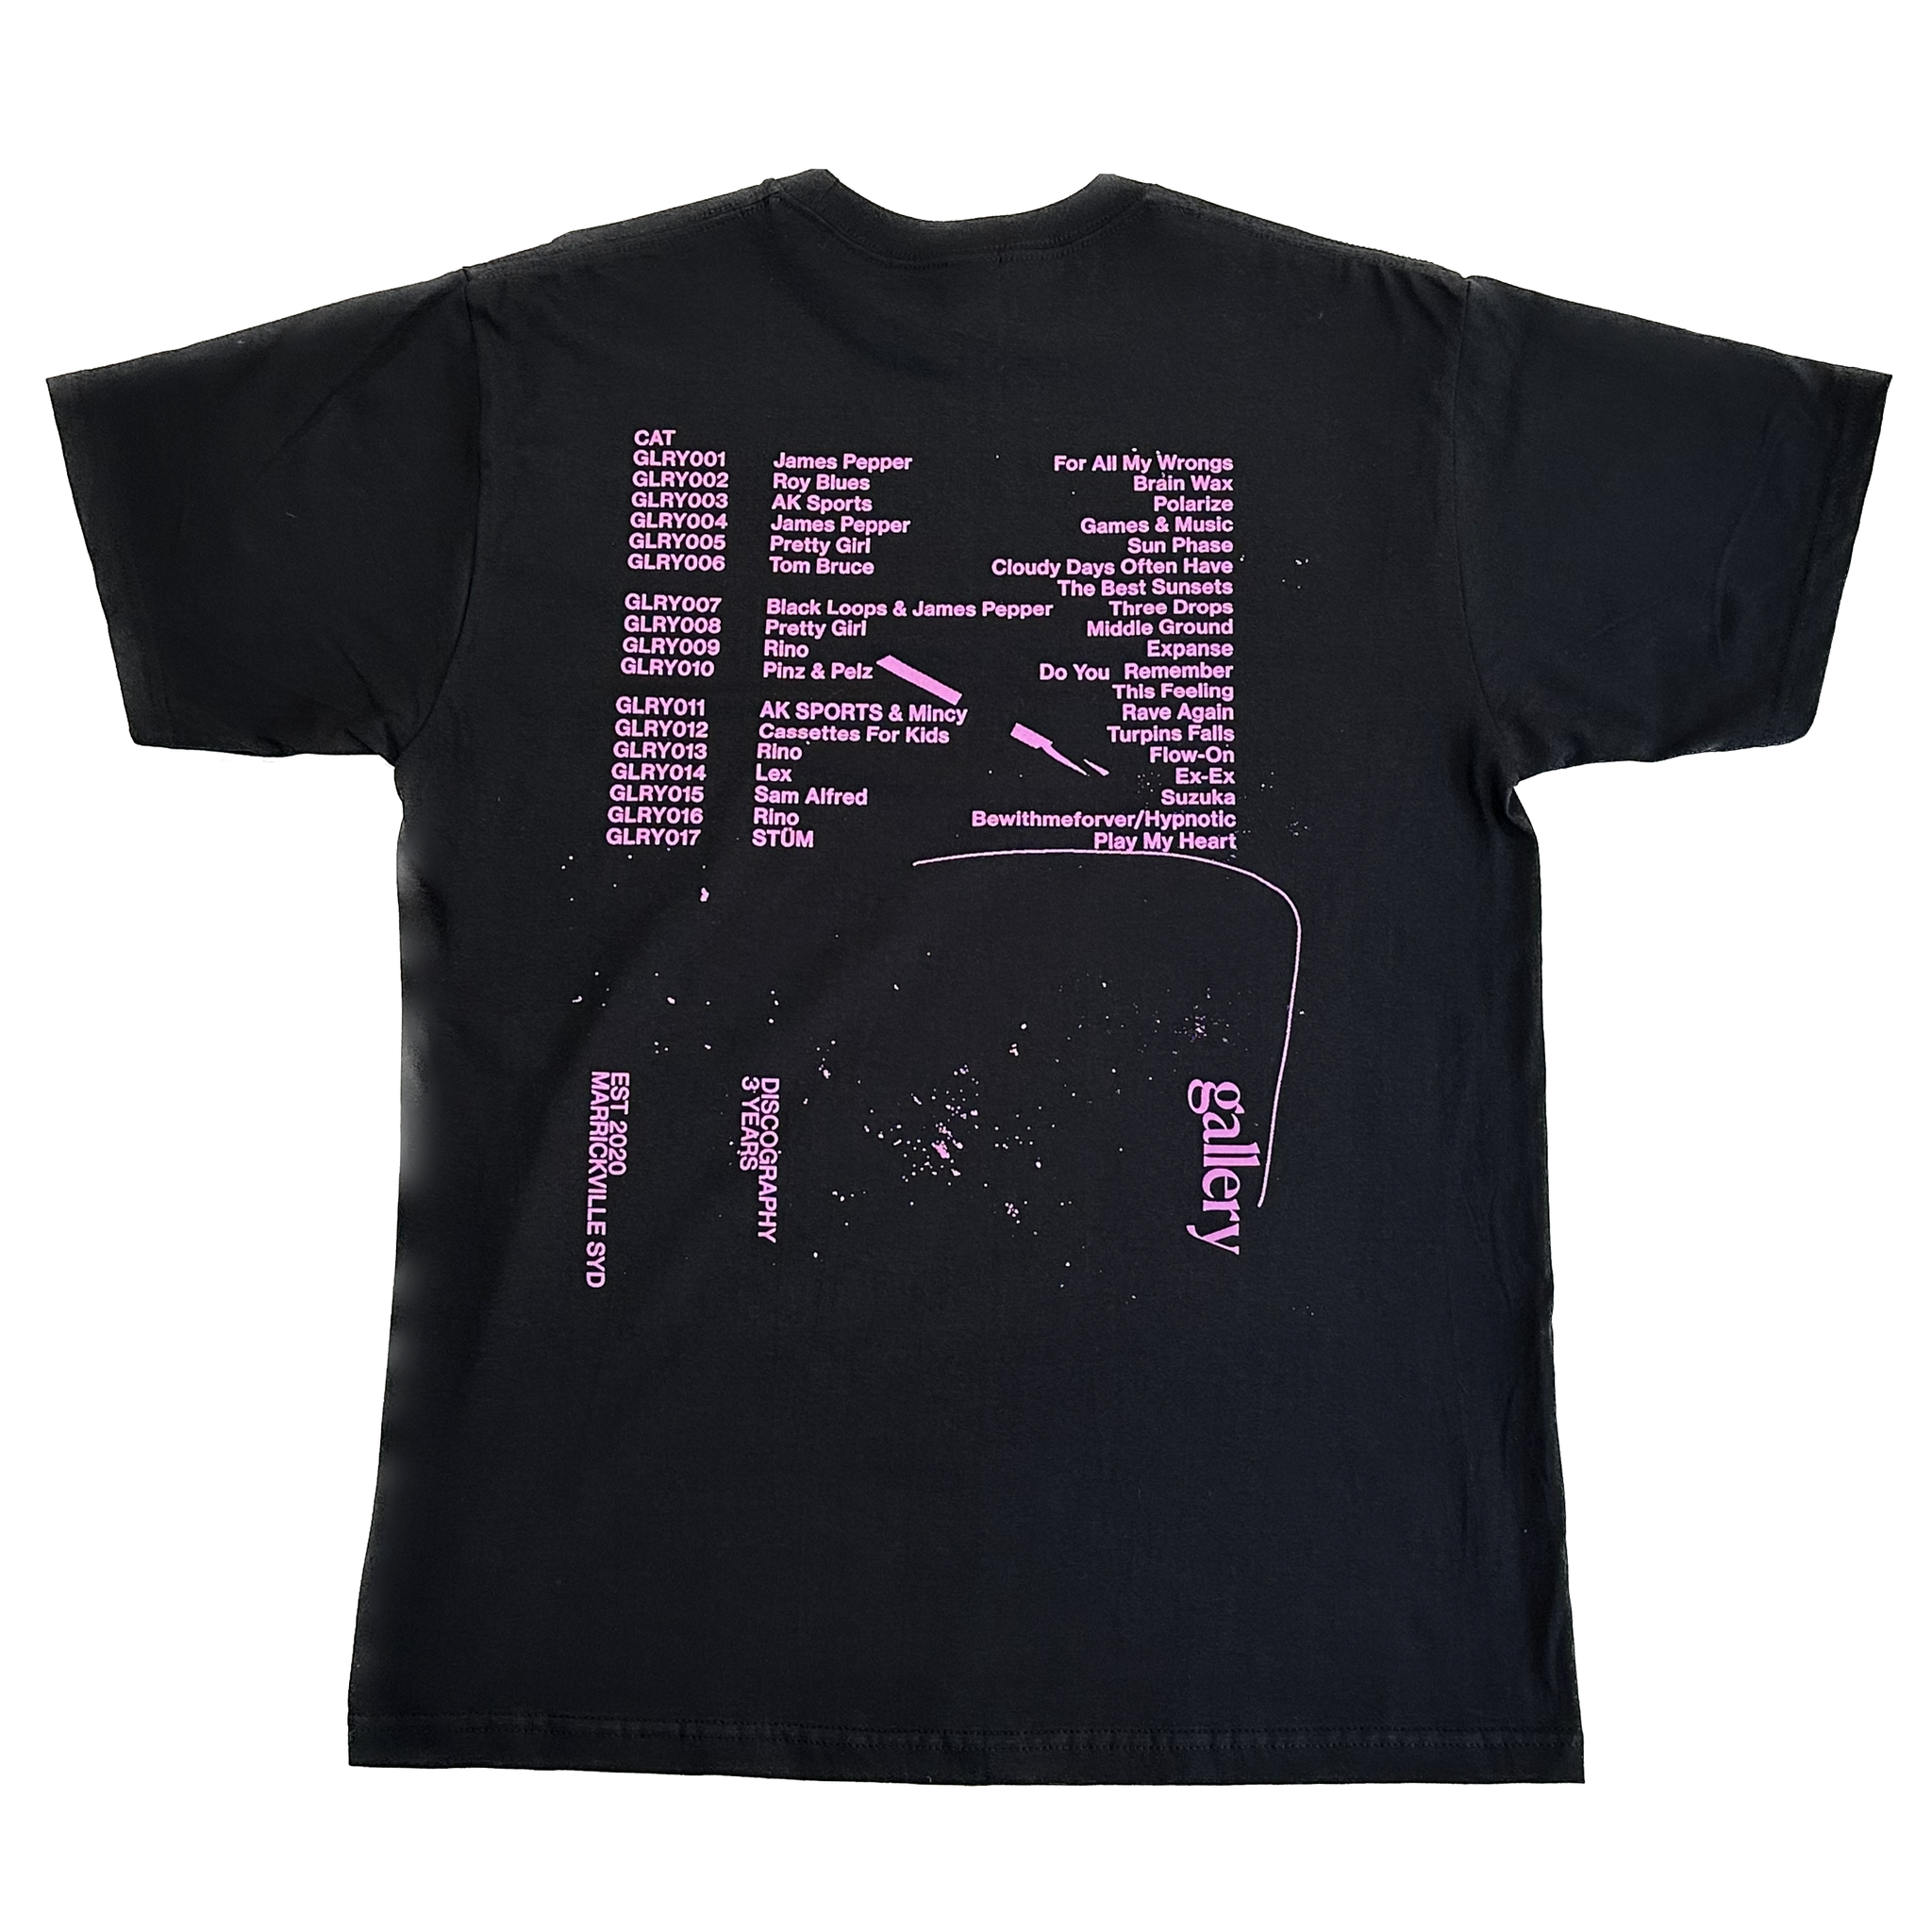 GALLERY DISCOGRAPHY TEE - BLACK